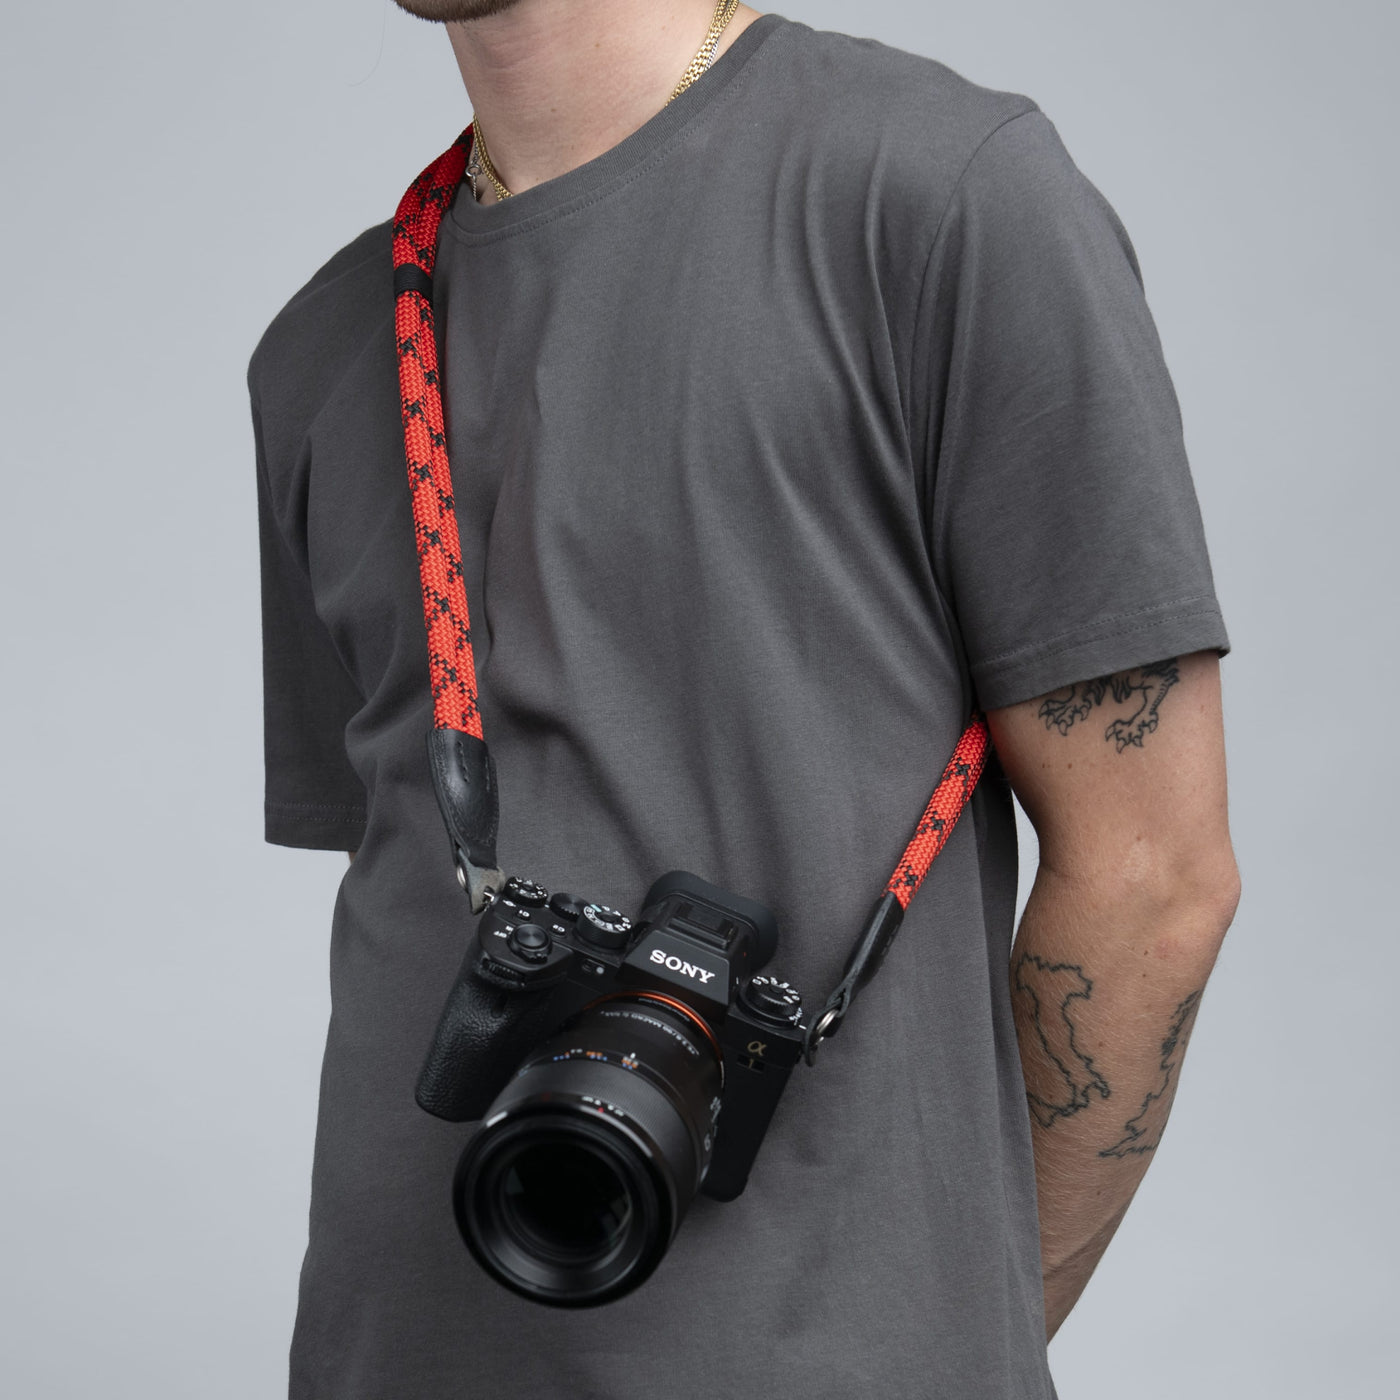 Leica camera on a photographer's hip held with red Double Rope Strap 